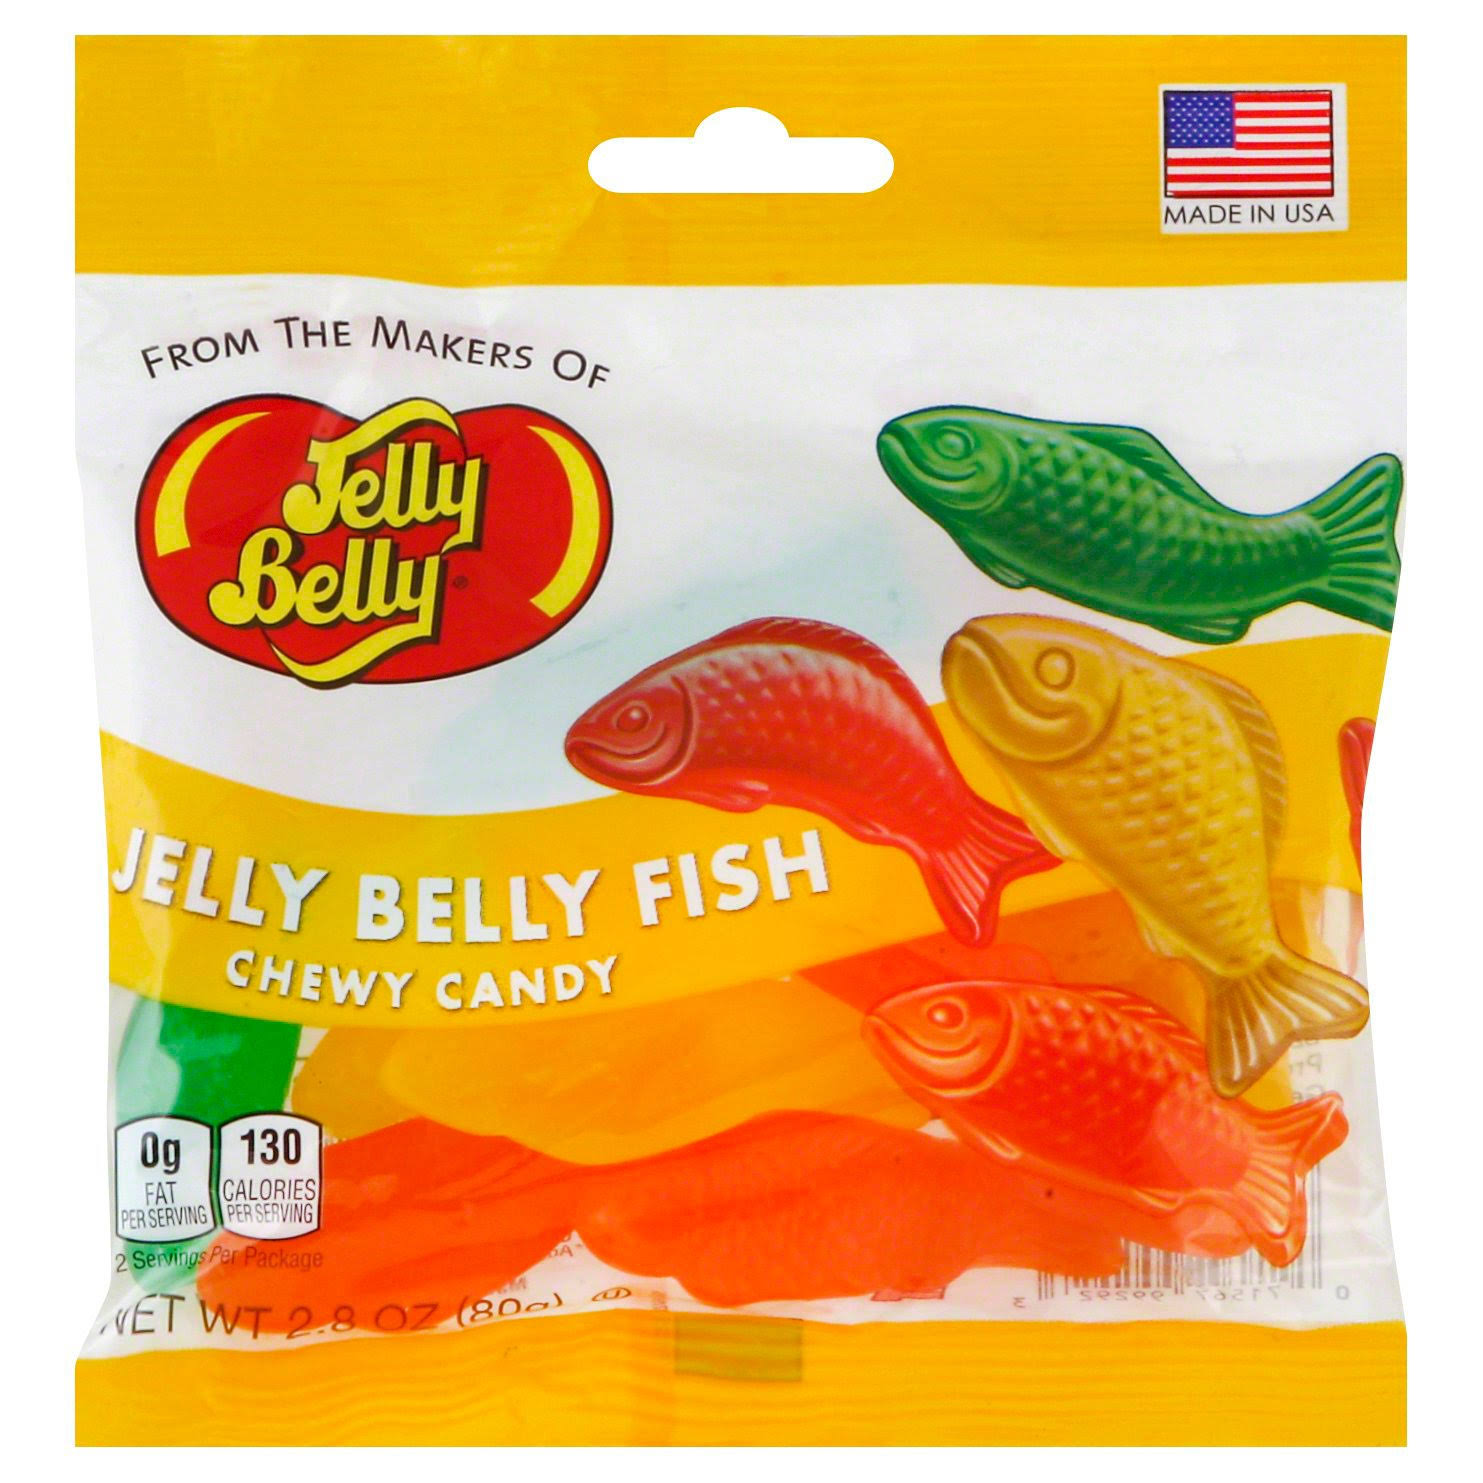 Jelly Belly Fish Chewy Candy, 2.8-oz, 12 Pack